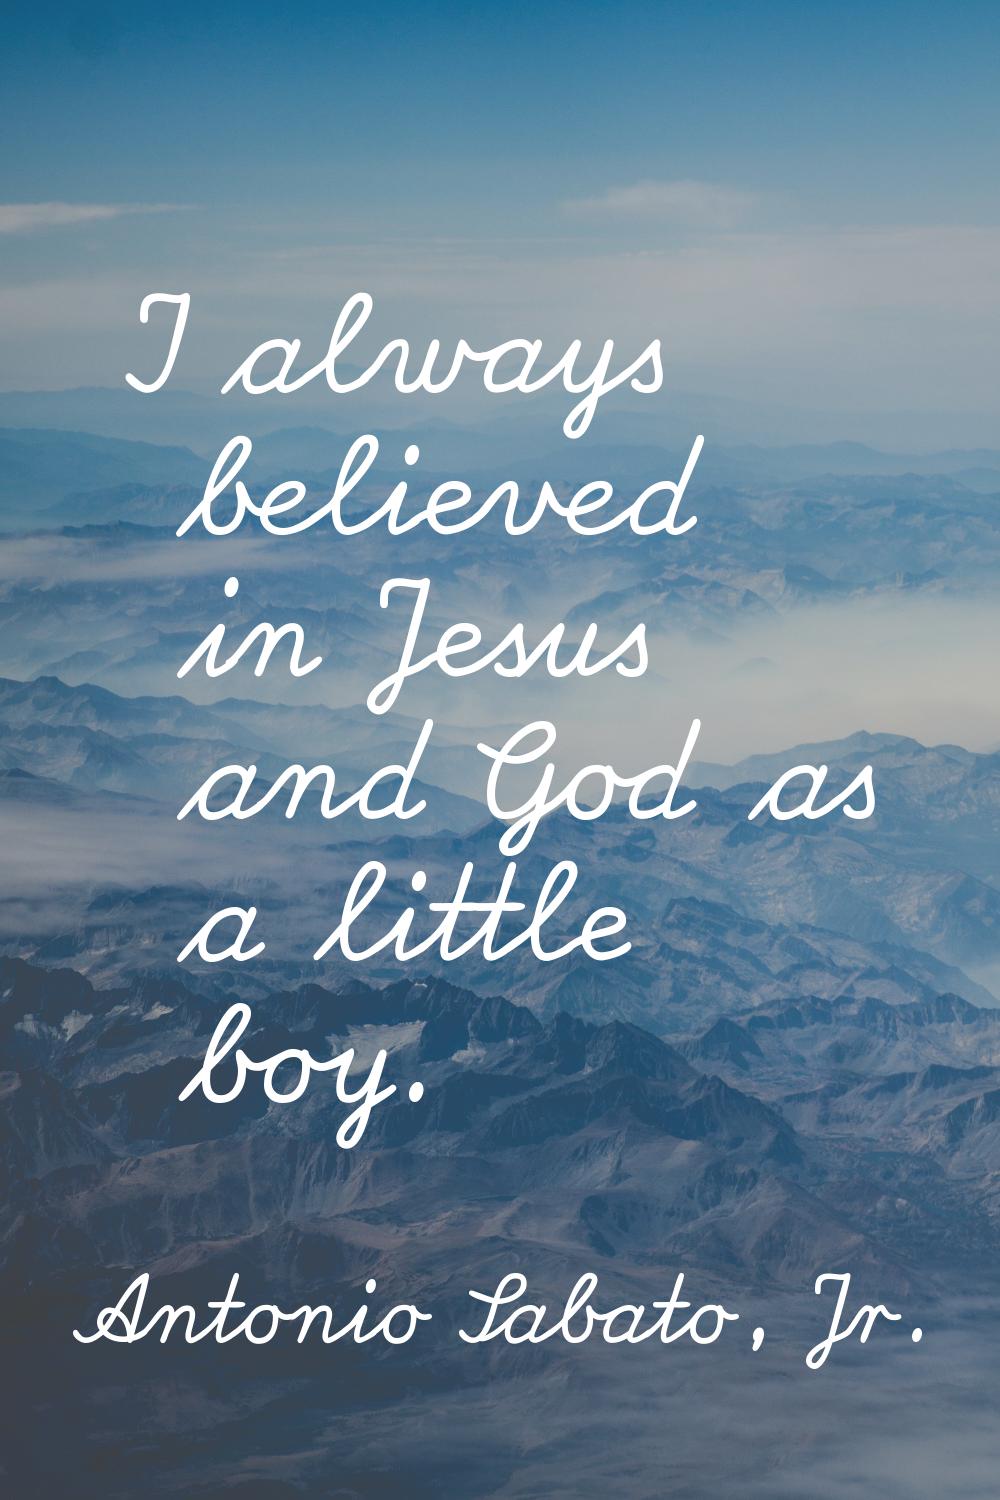 I always believed in Jesus and God as a little boy.